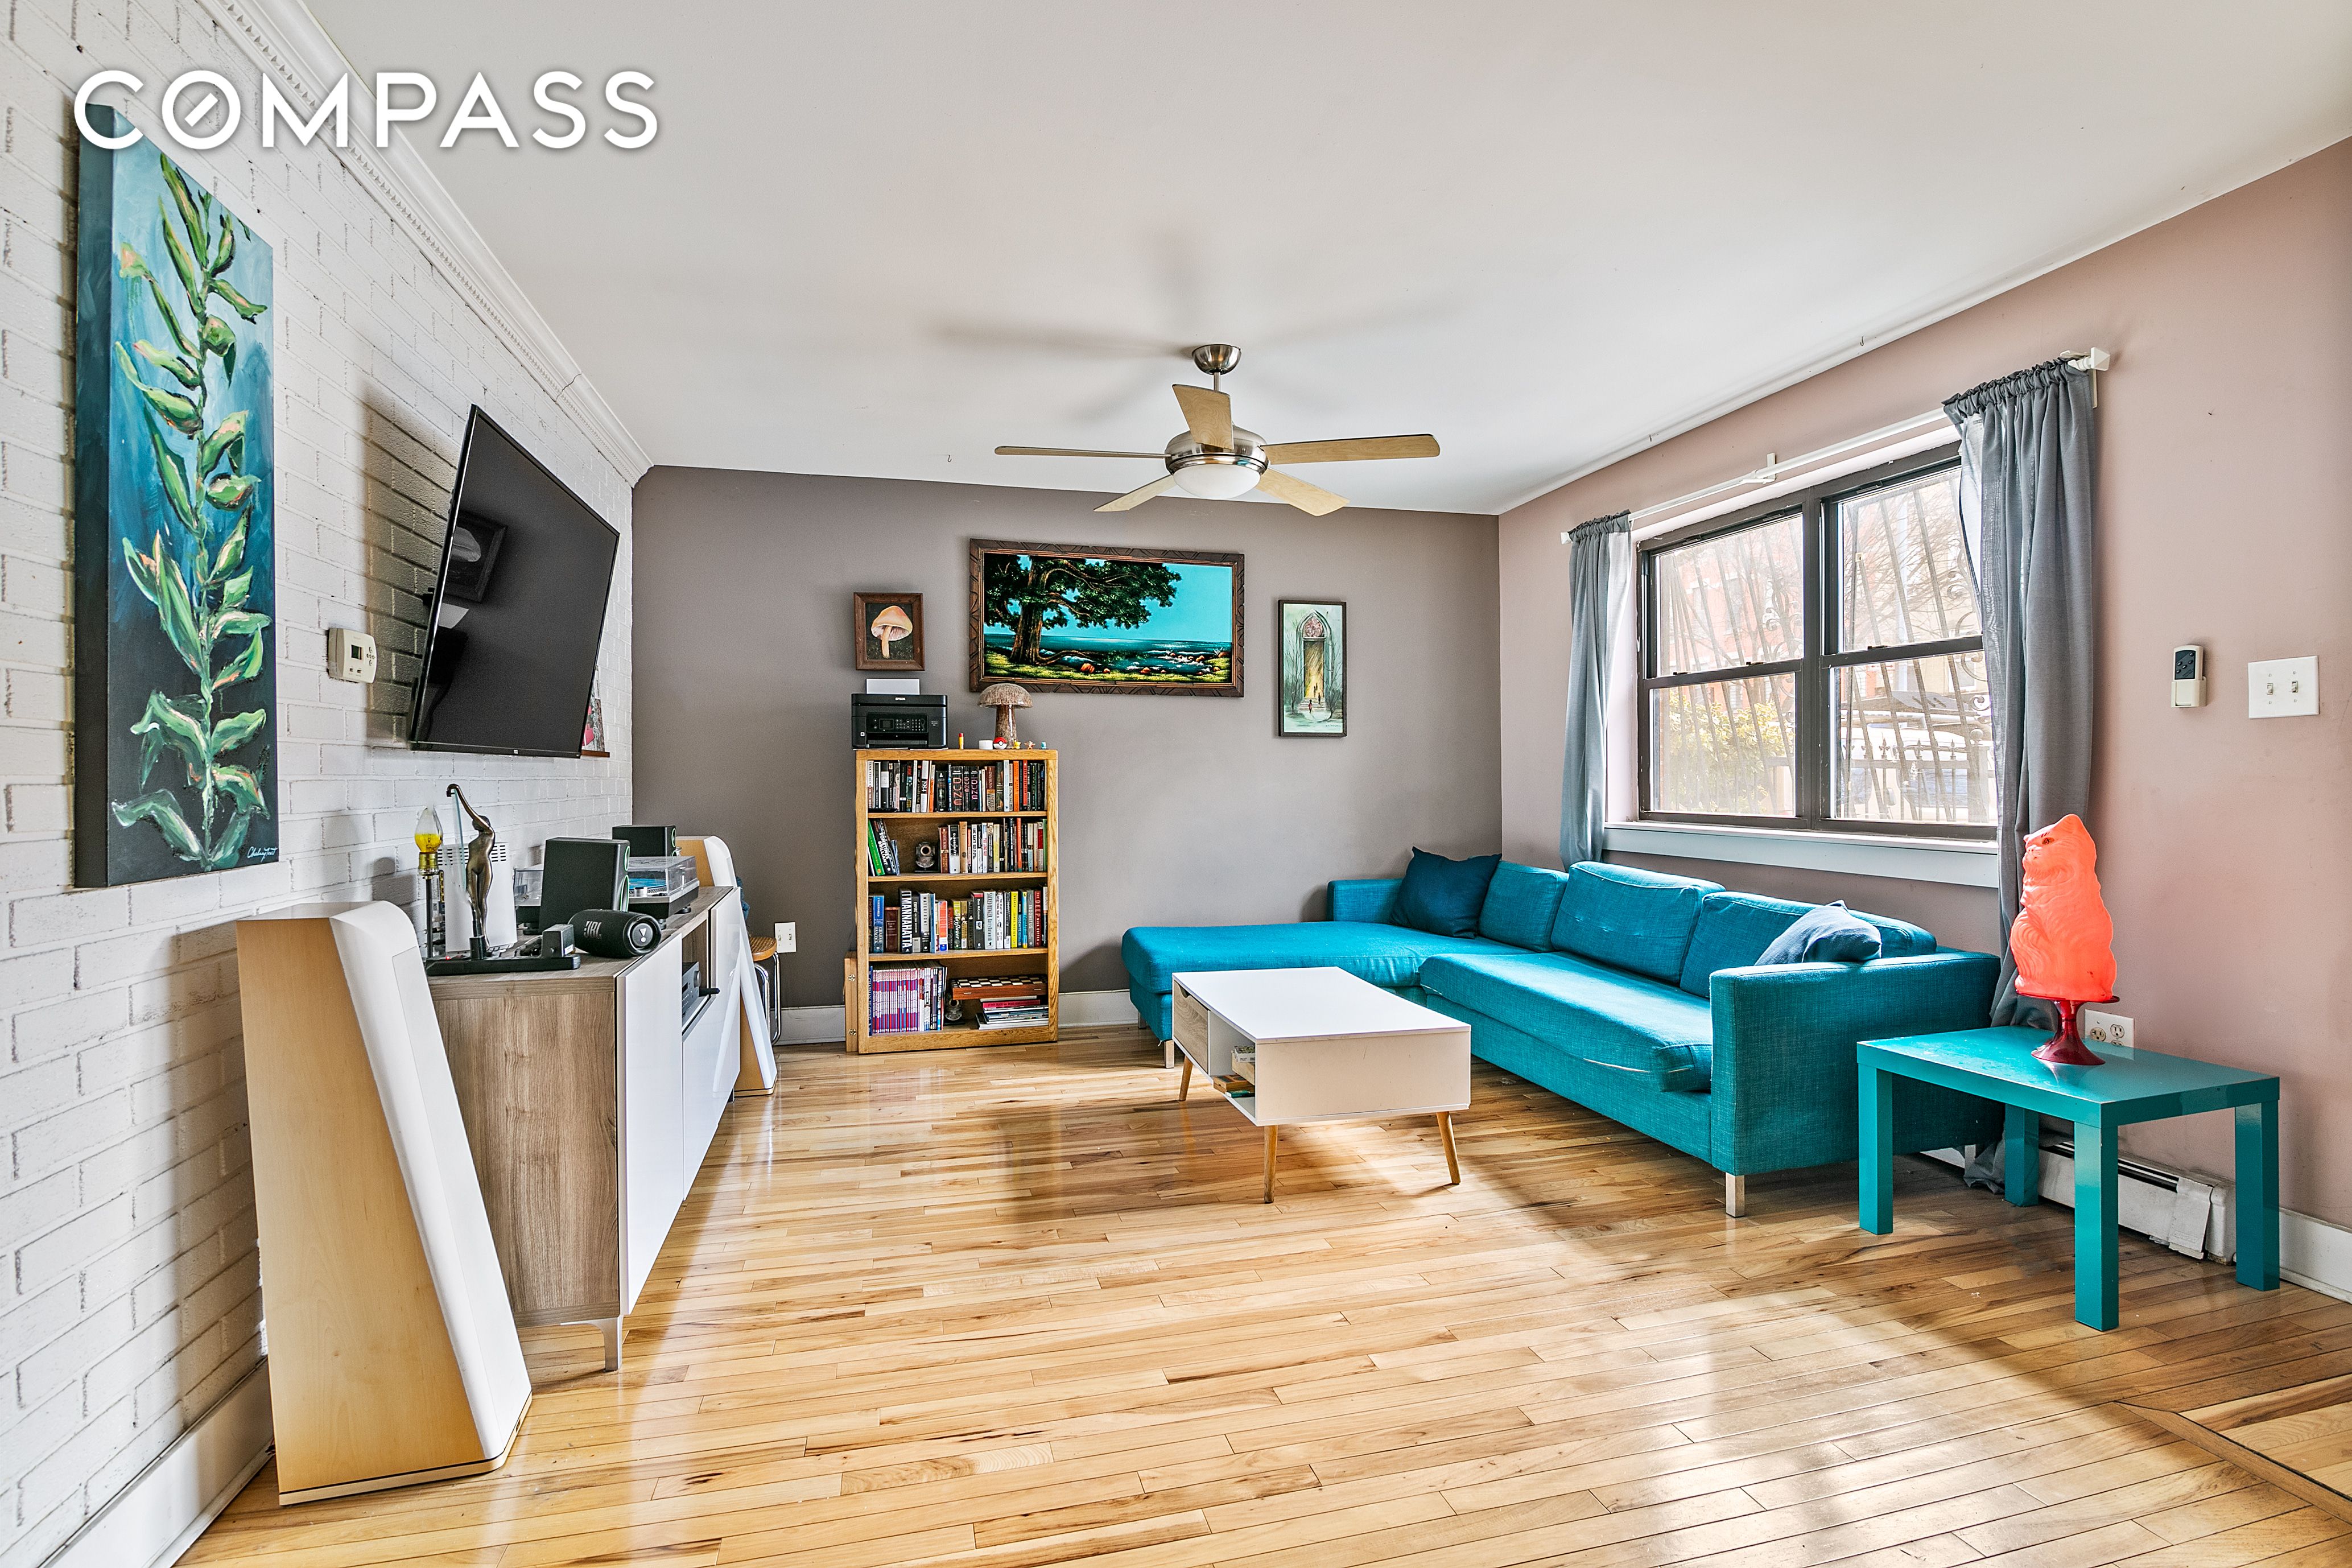 943 Gates Avenue, Bedford-Stuyvesant, Downtown, NYC - 5 Bedrooms  
3 Bathrooms  
3 Rooms - 